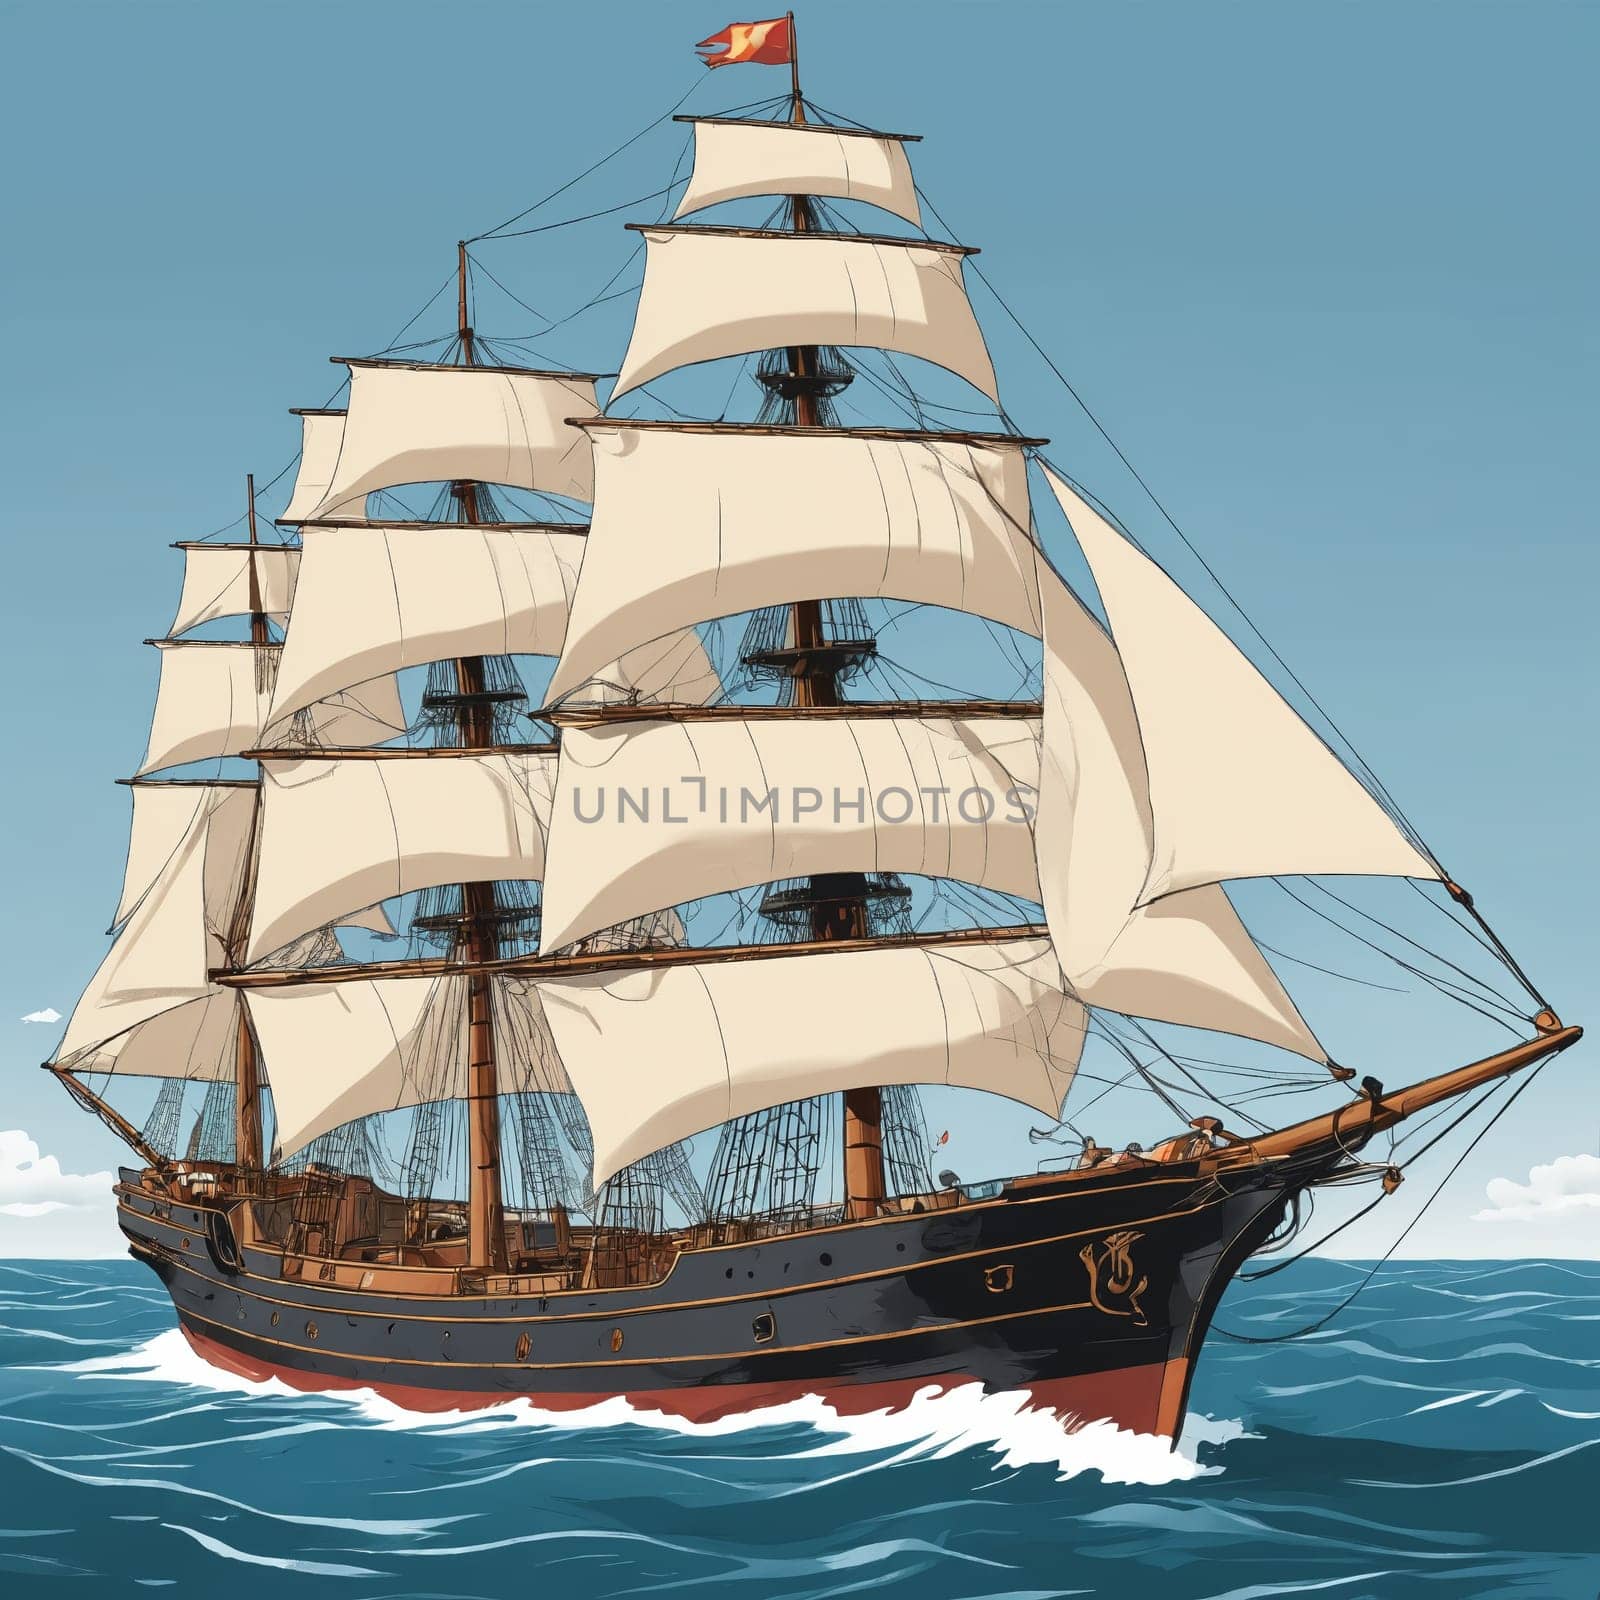 A highly detailed classic sailing ship enhanced with subtle watercolor tones.